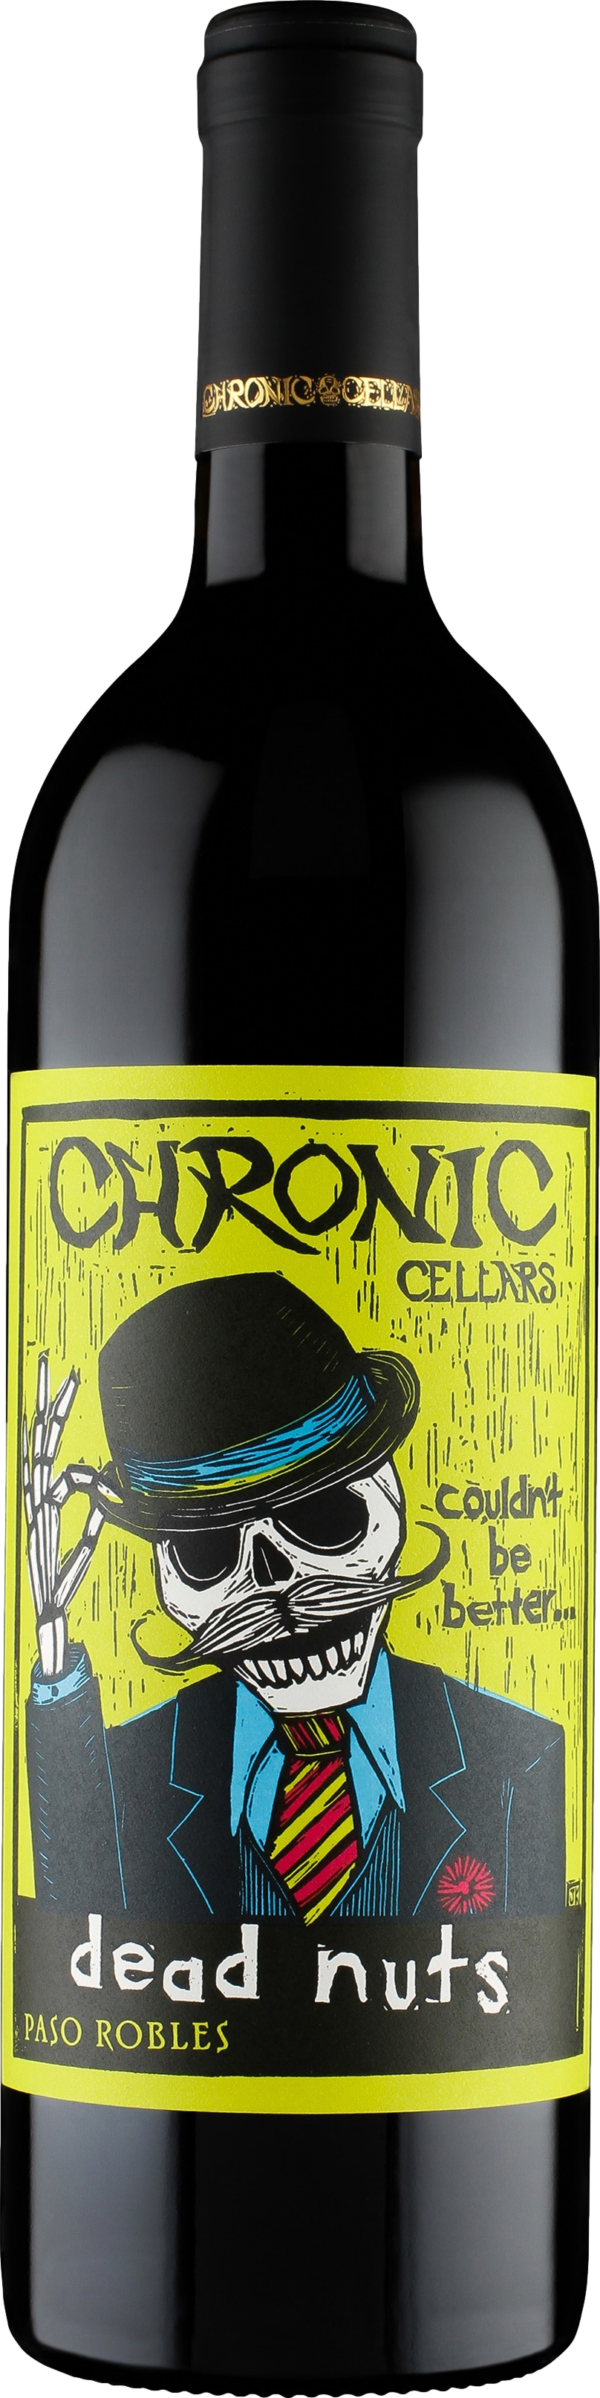 Product image of Chronic Cellars Dead Nuts 2018 from 8wines